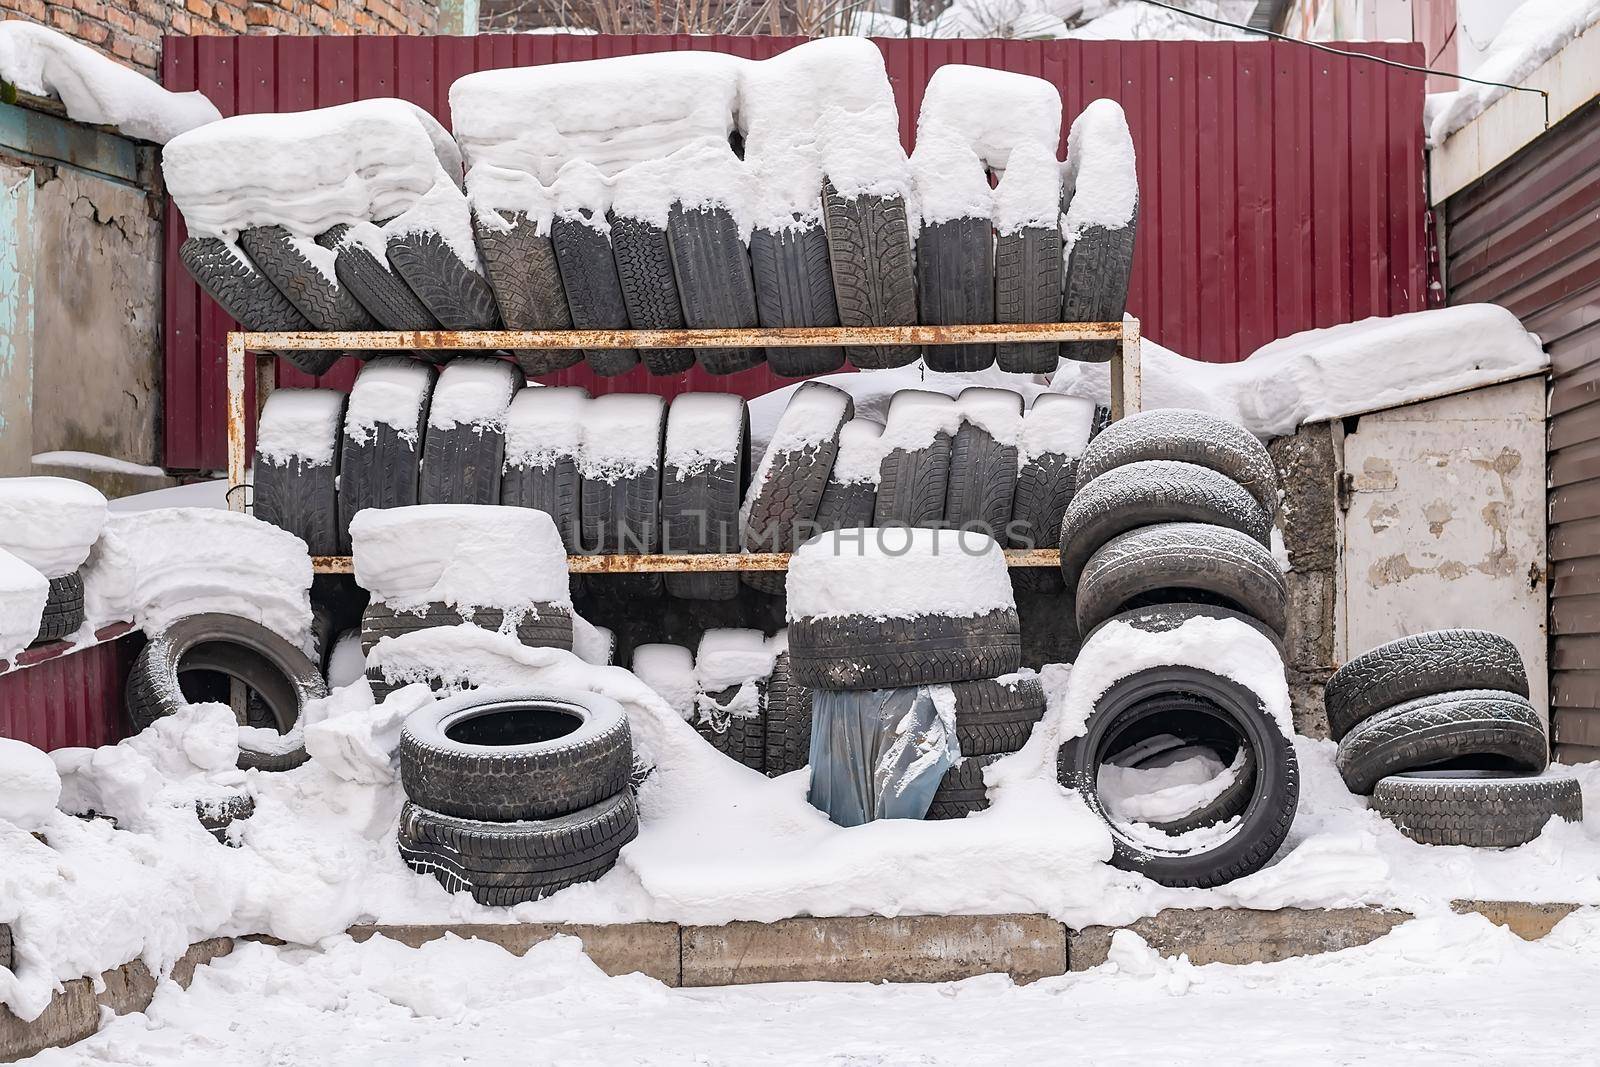 a pile of worn, used car tires lie in the snow in winter by jk3030